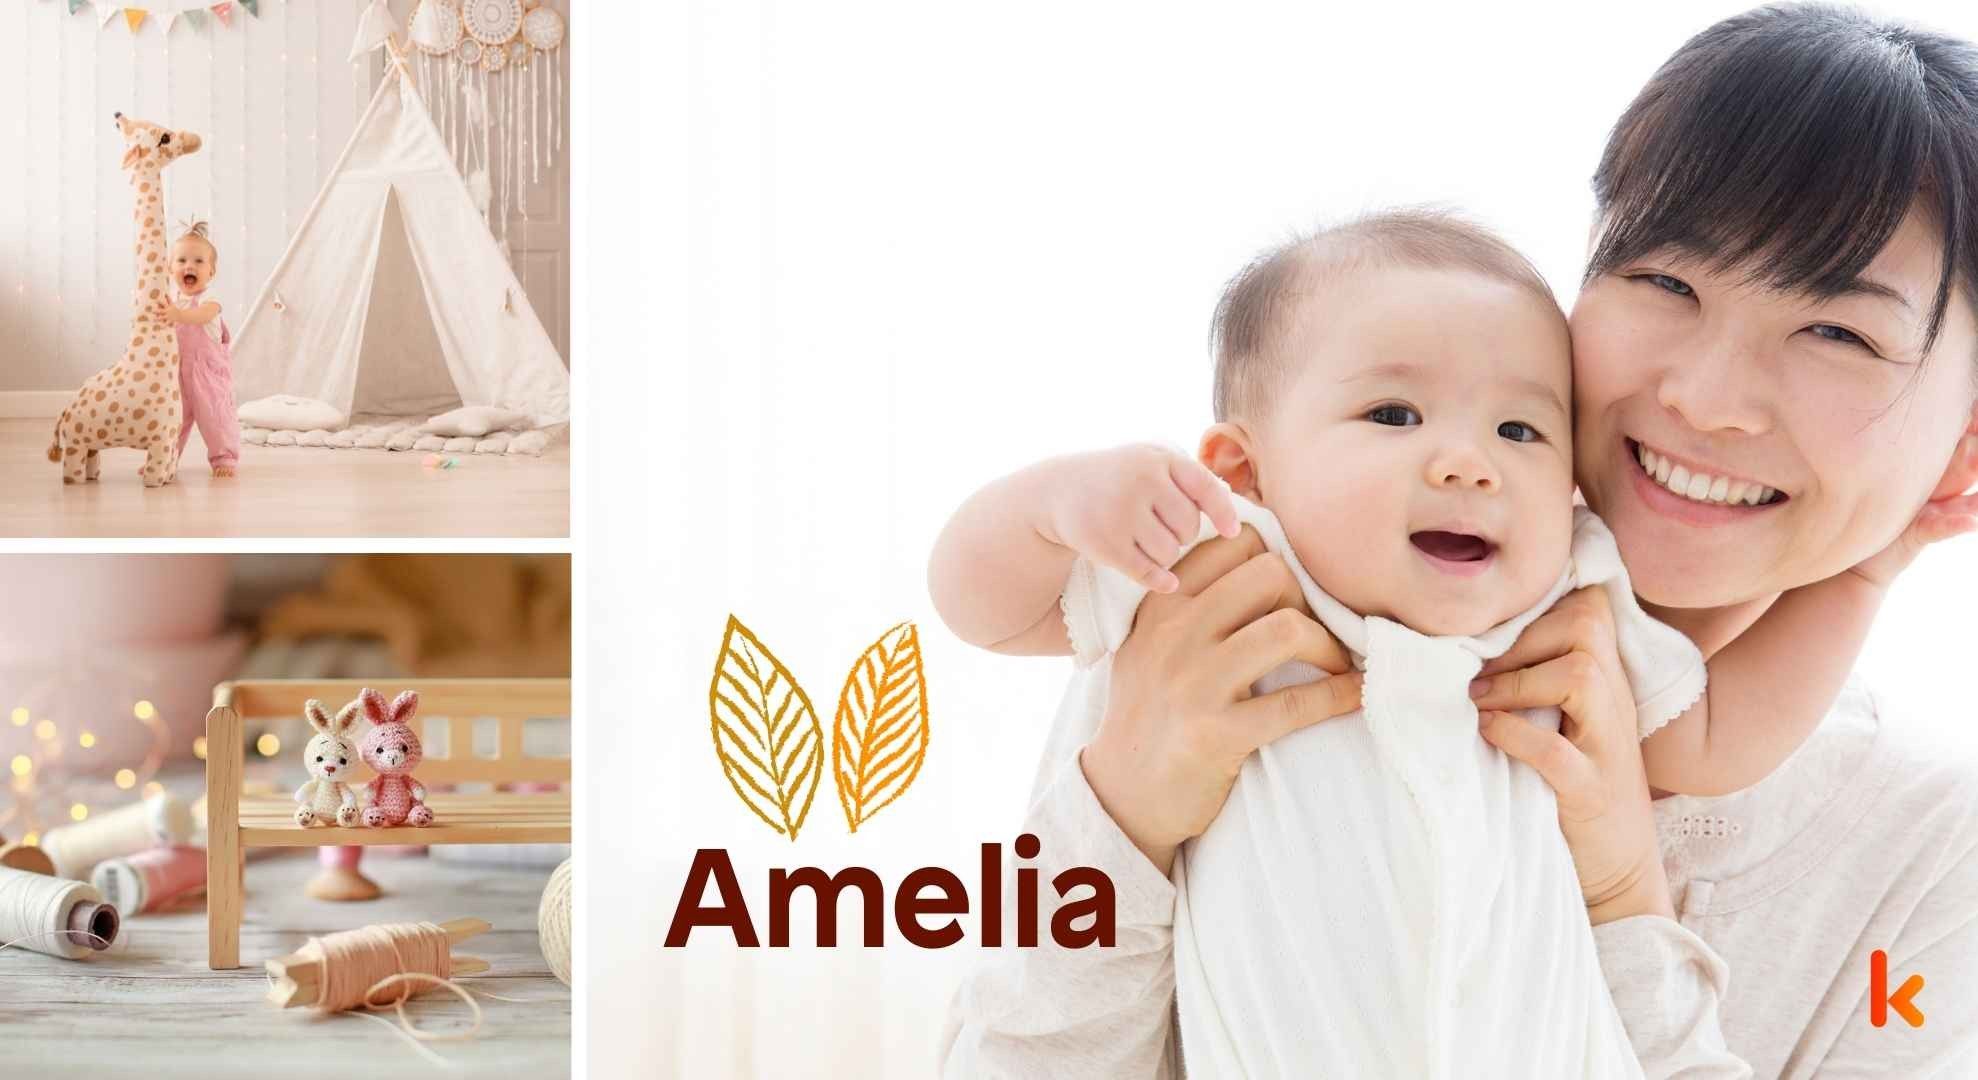 Meaning of the name Amelia